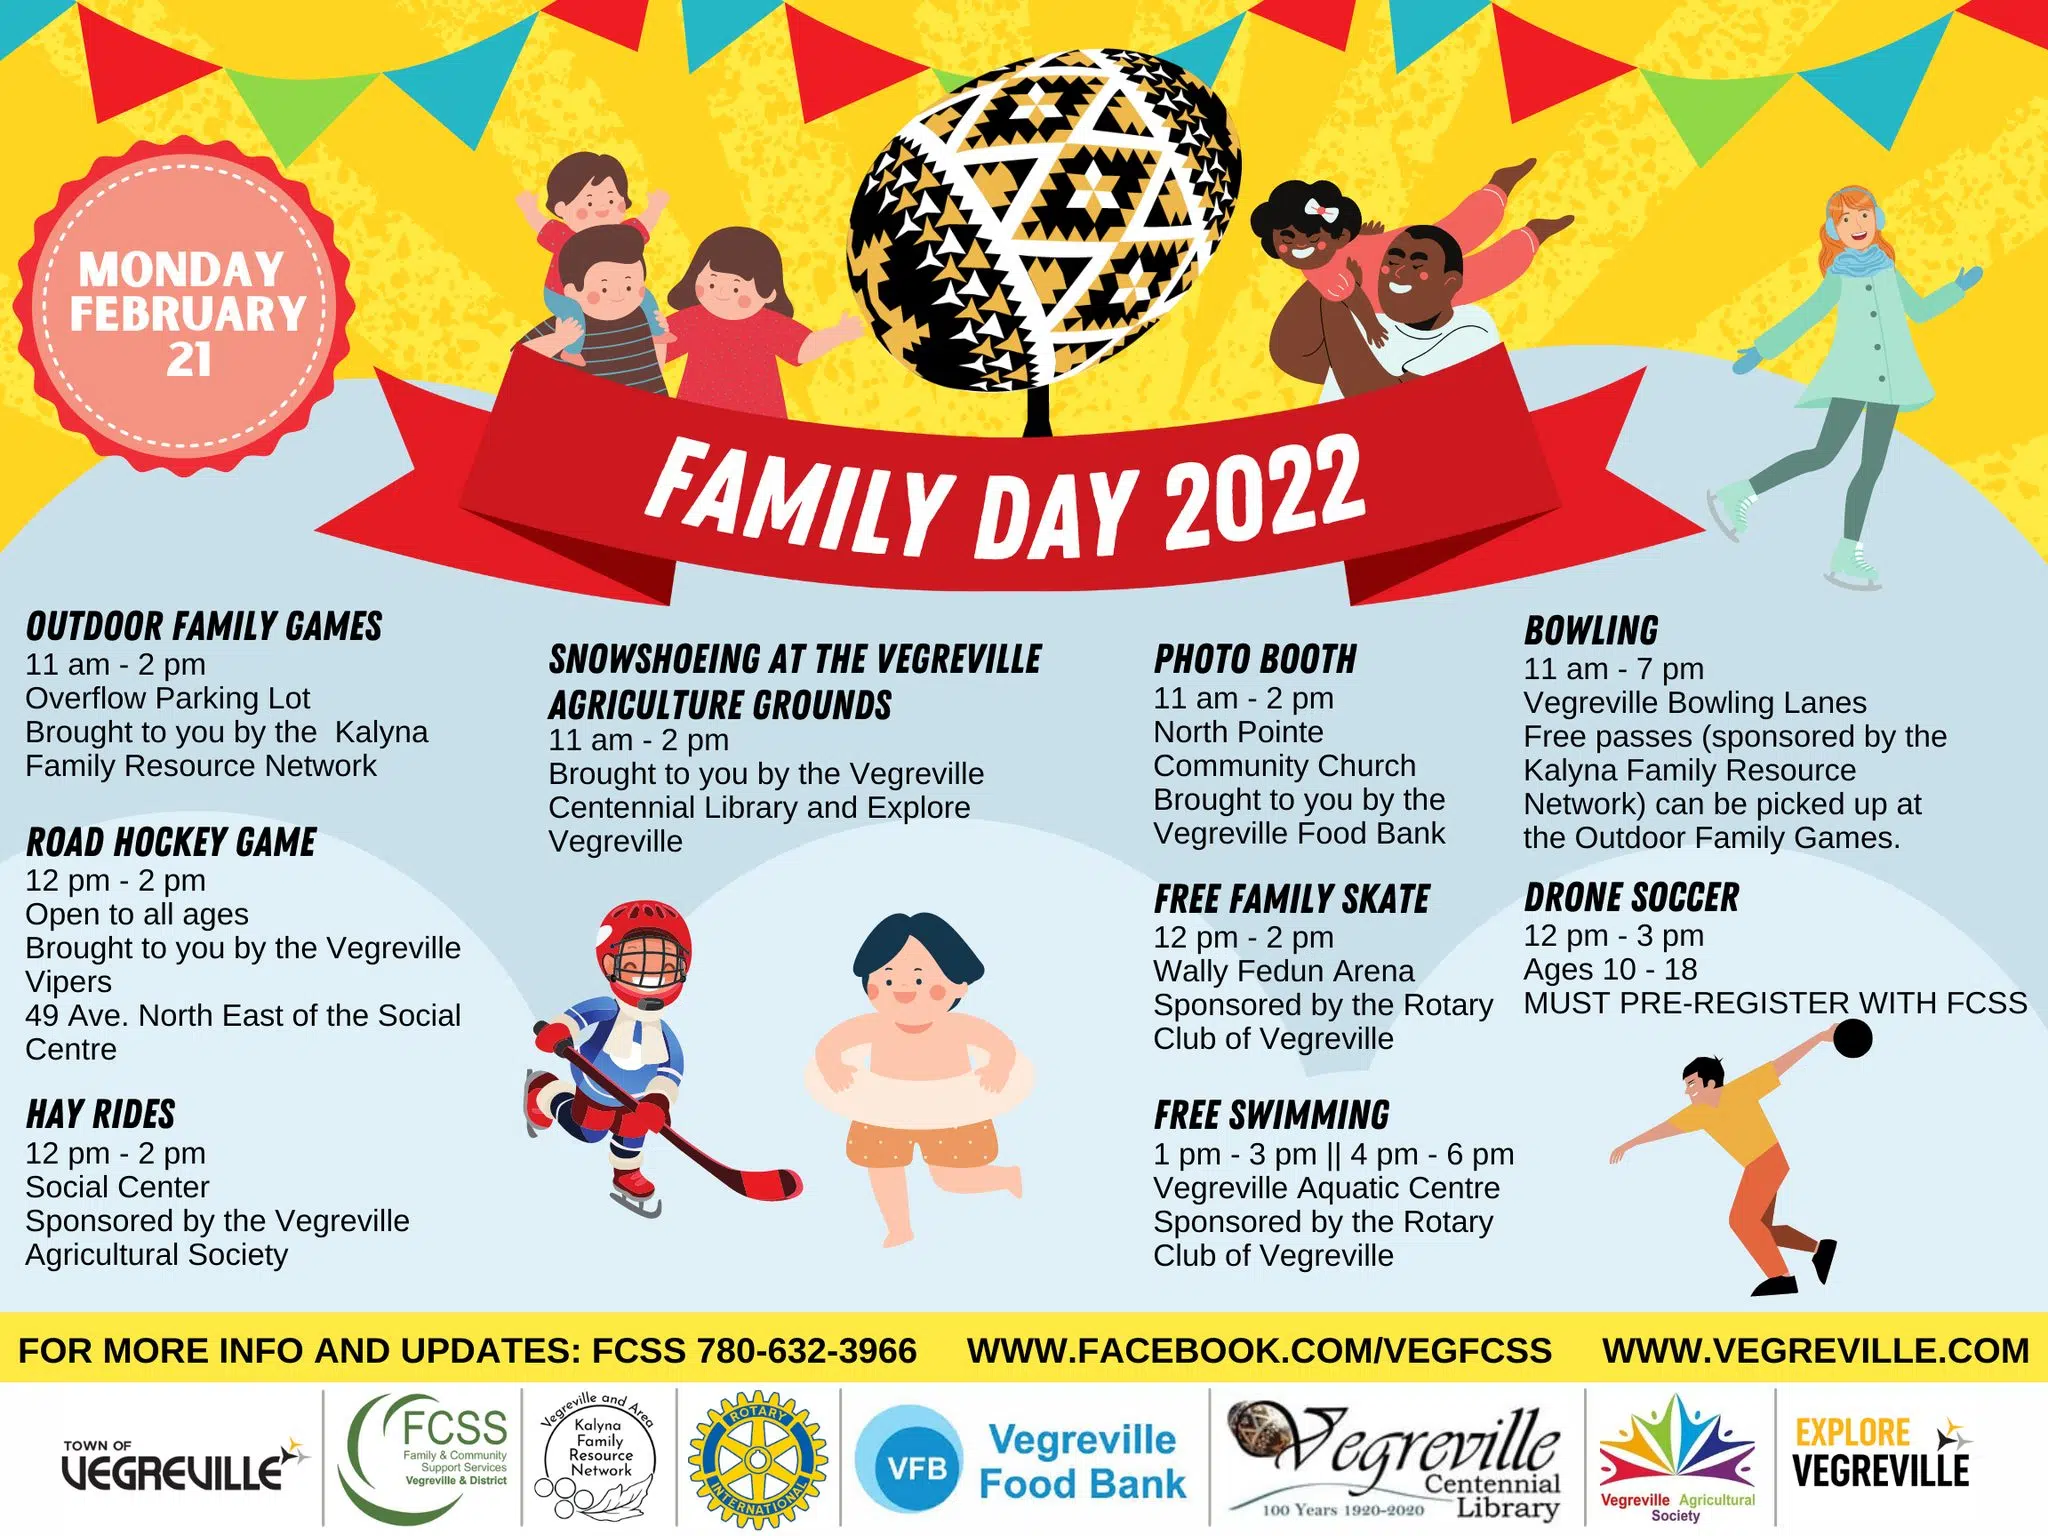 Family Day Fun Planned for Monday